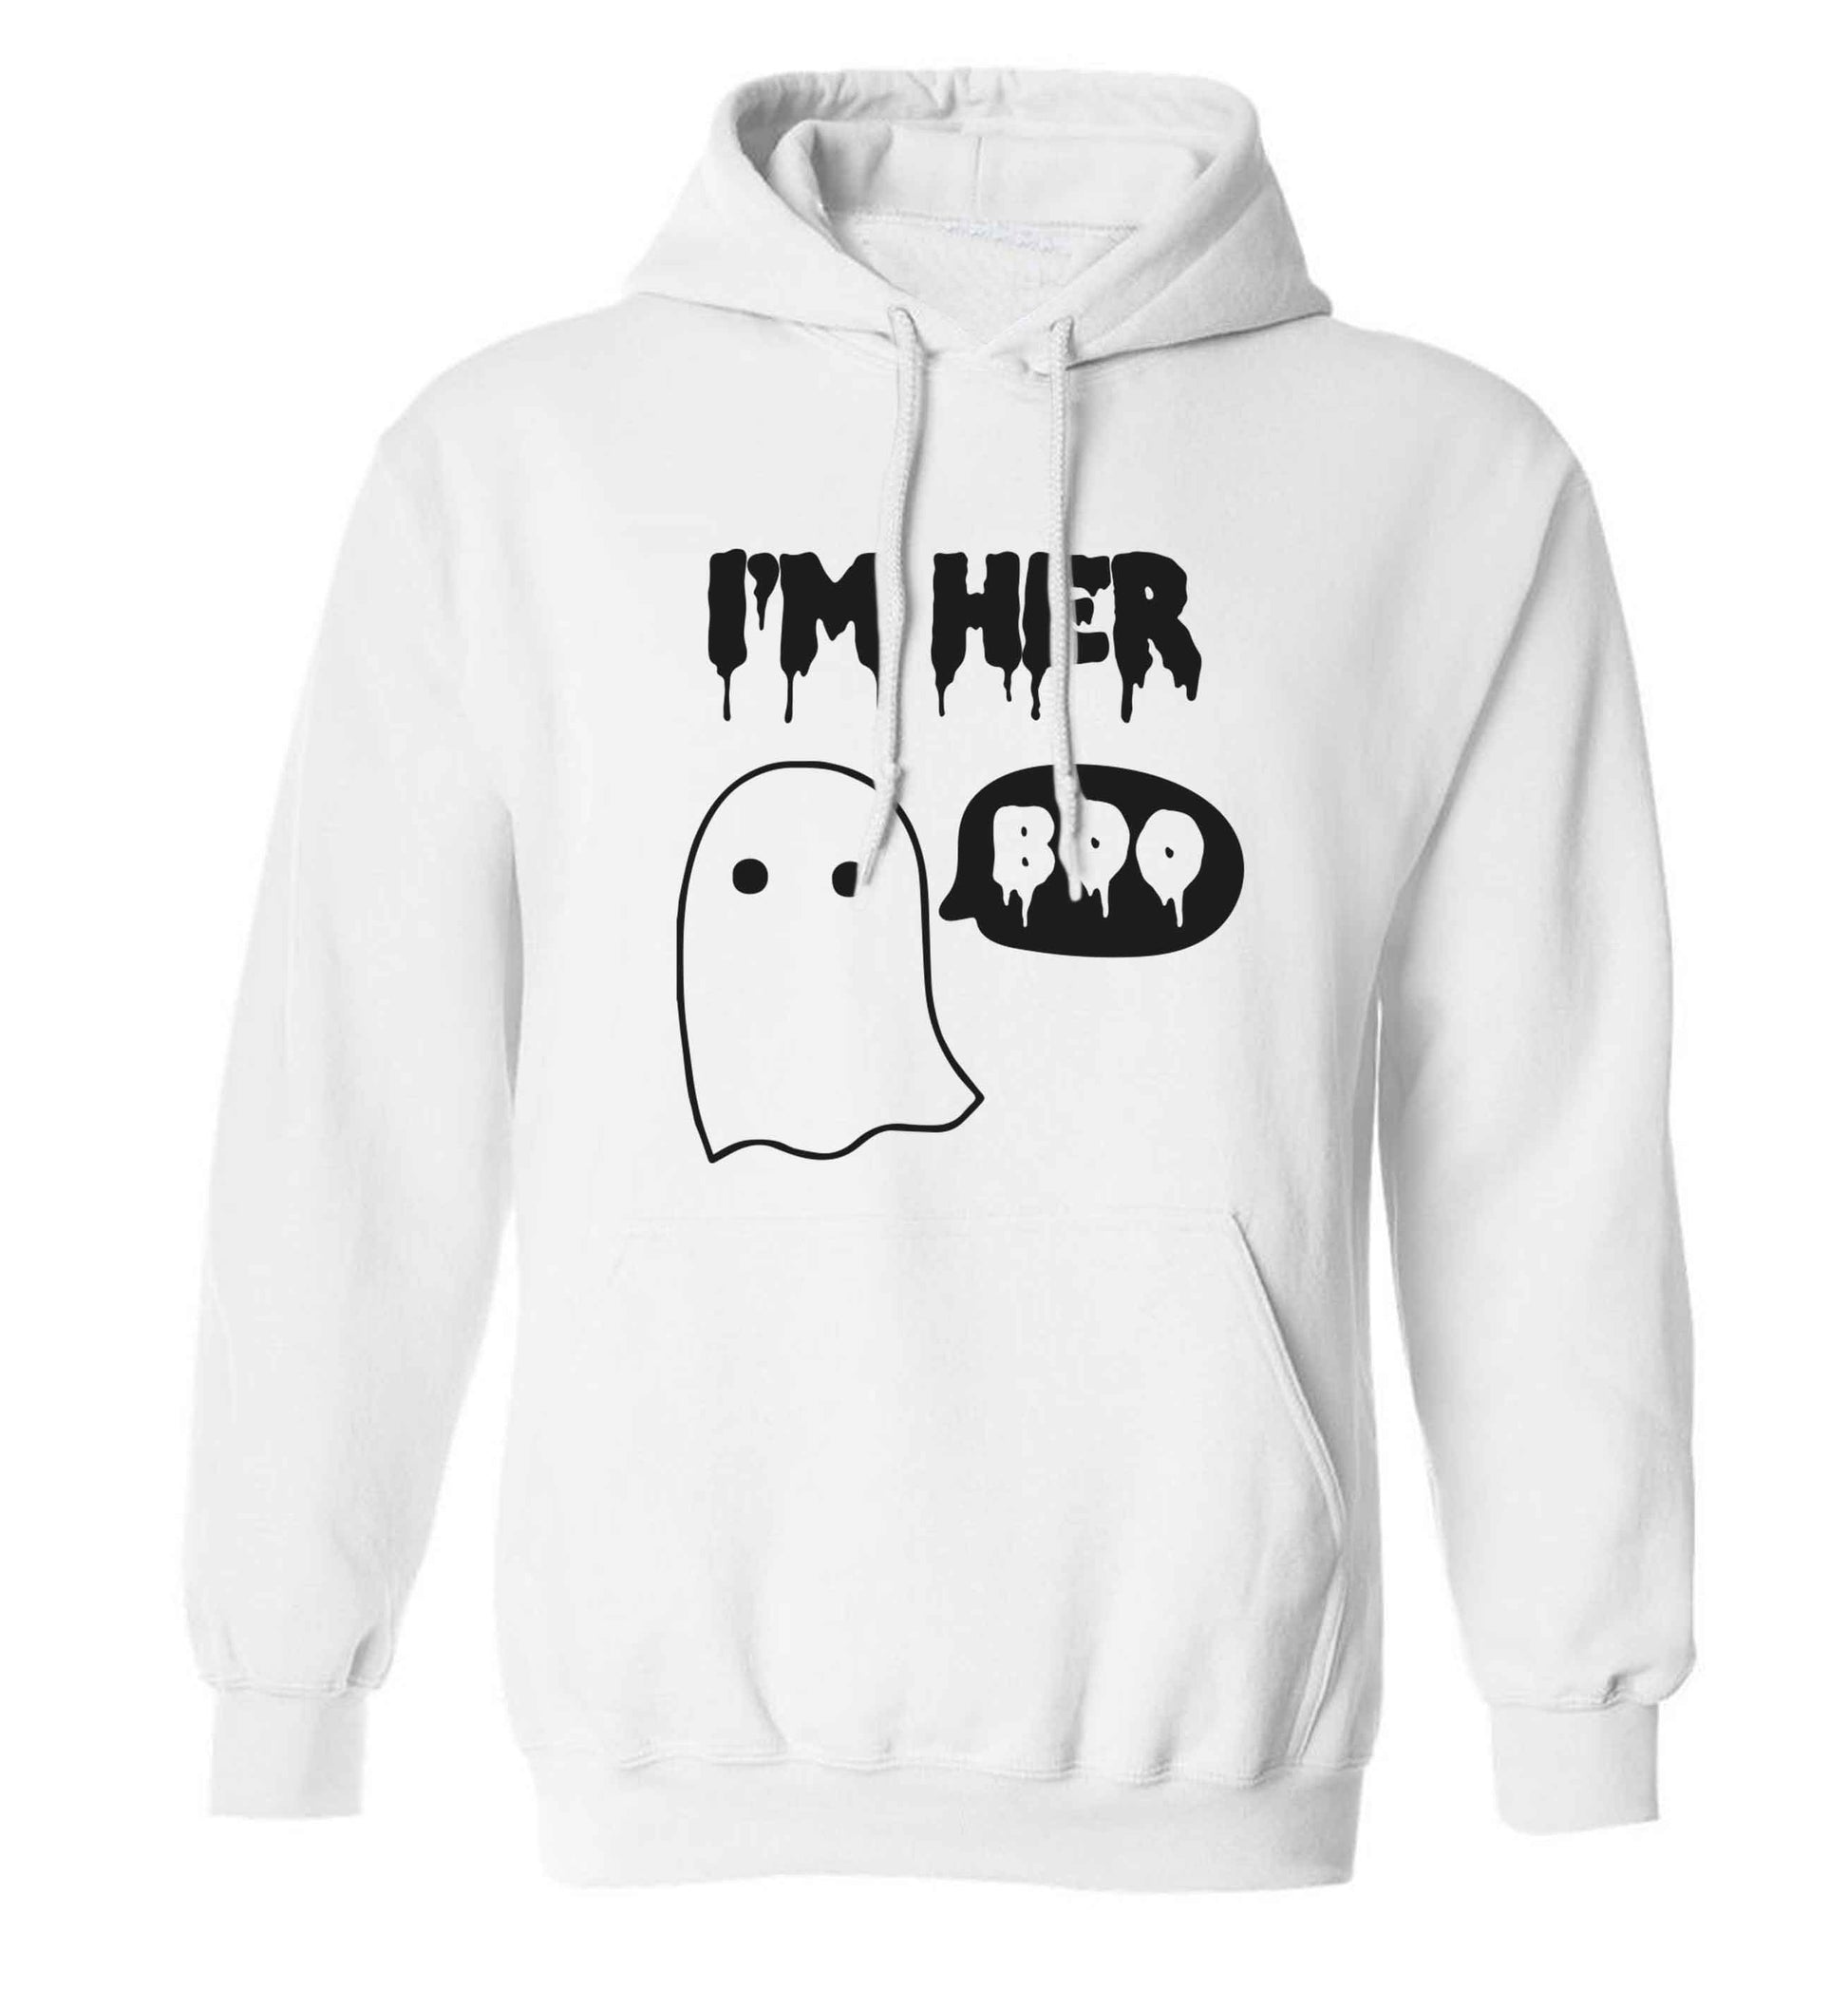 I'm her boo adults unisex white hoodie 2XL